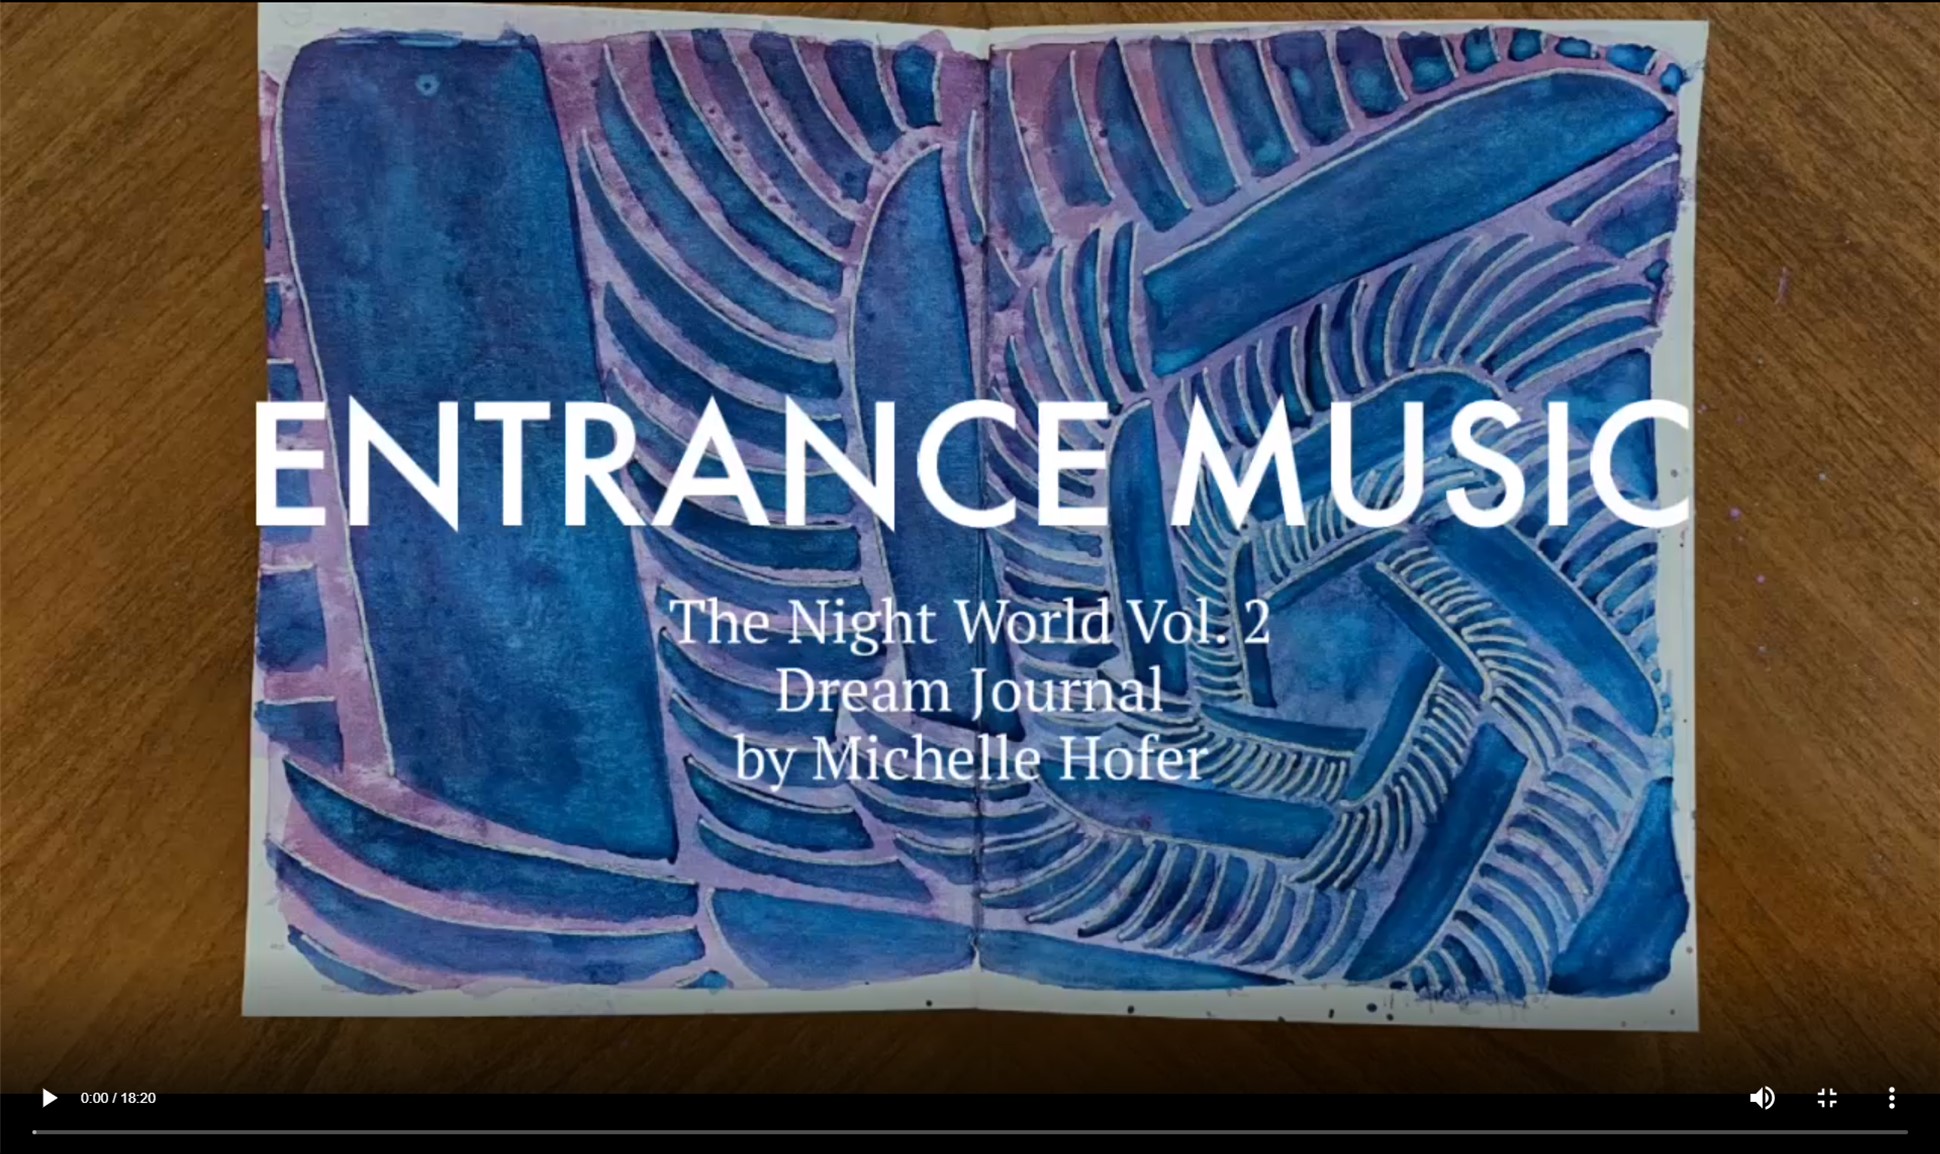 Entrance Music Video Link - The Night World Vol. 2 Dream Journal by Michelle L Hofer